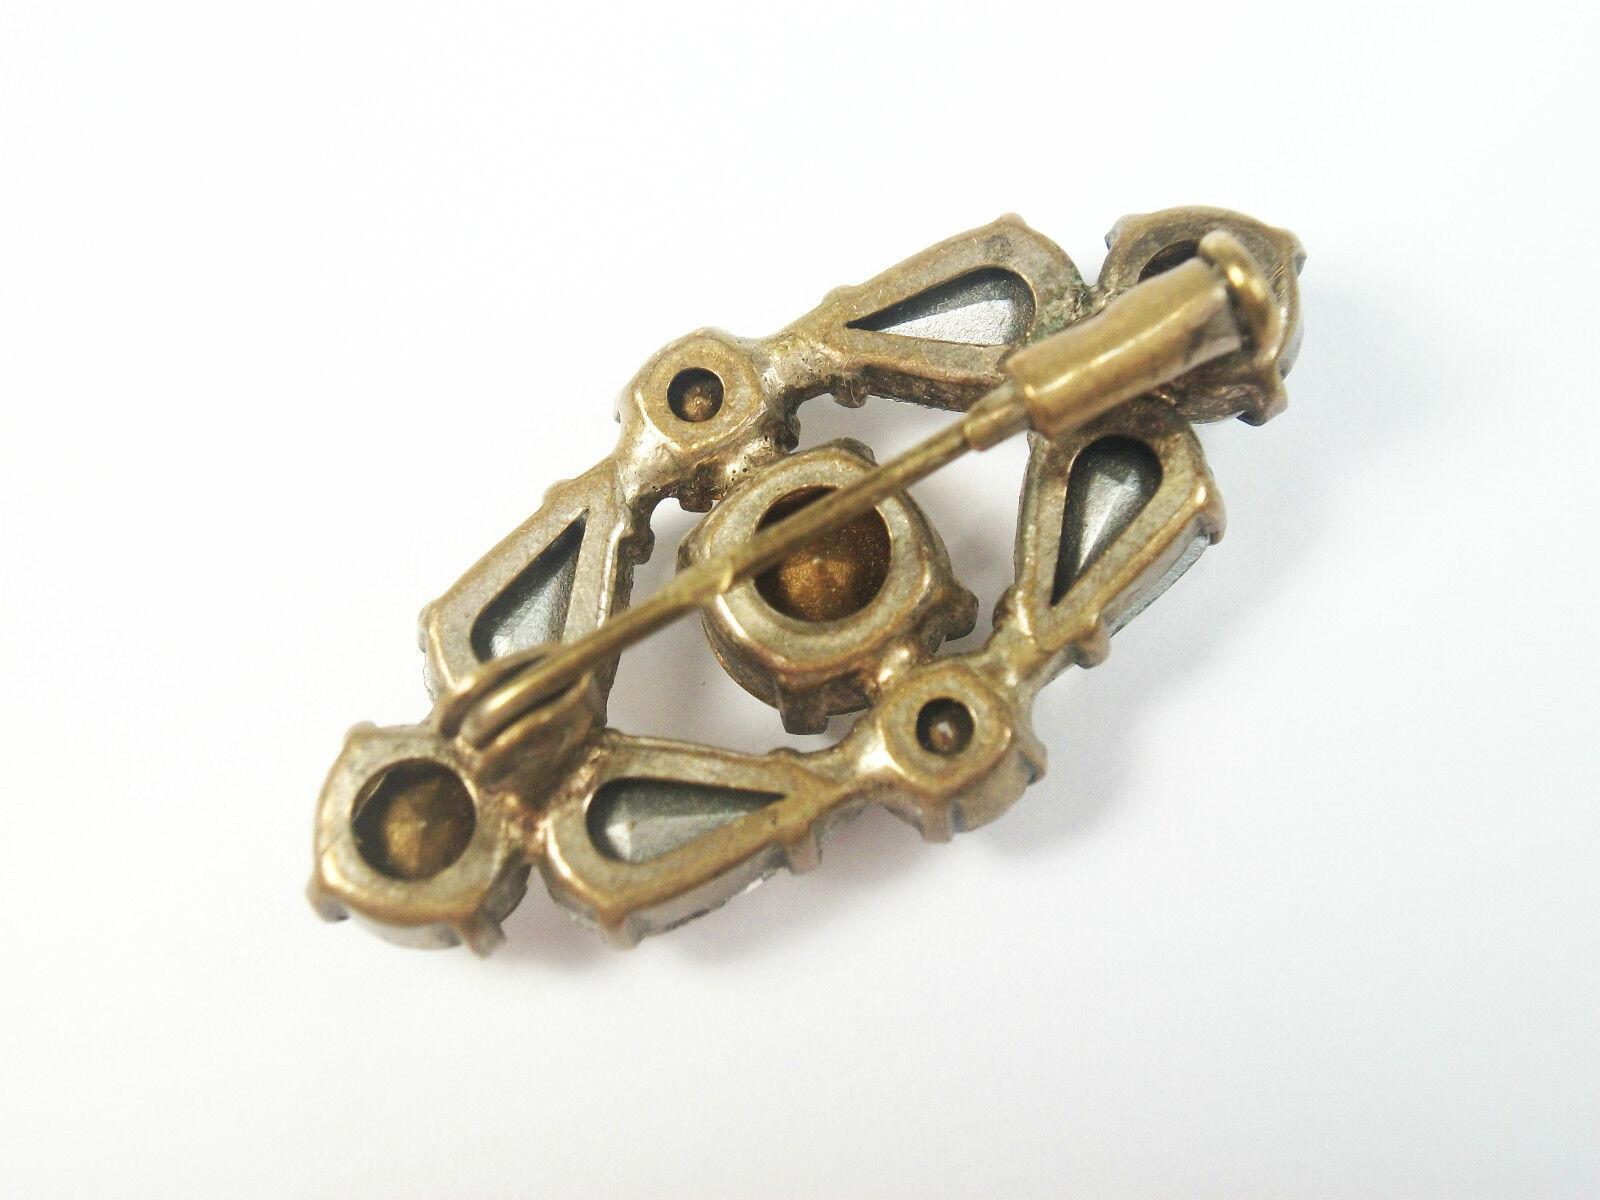 Vintage Rhinestone Brooch - Trombone Clasp - Unsigned - Circa 1950's For Sale 2